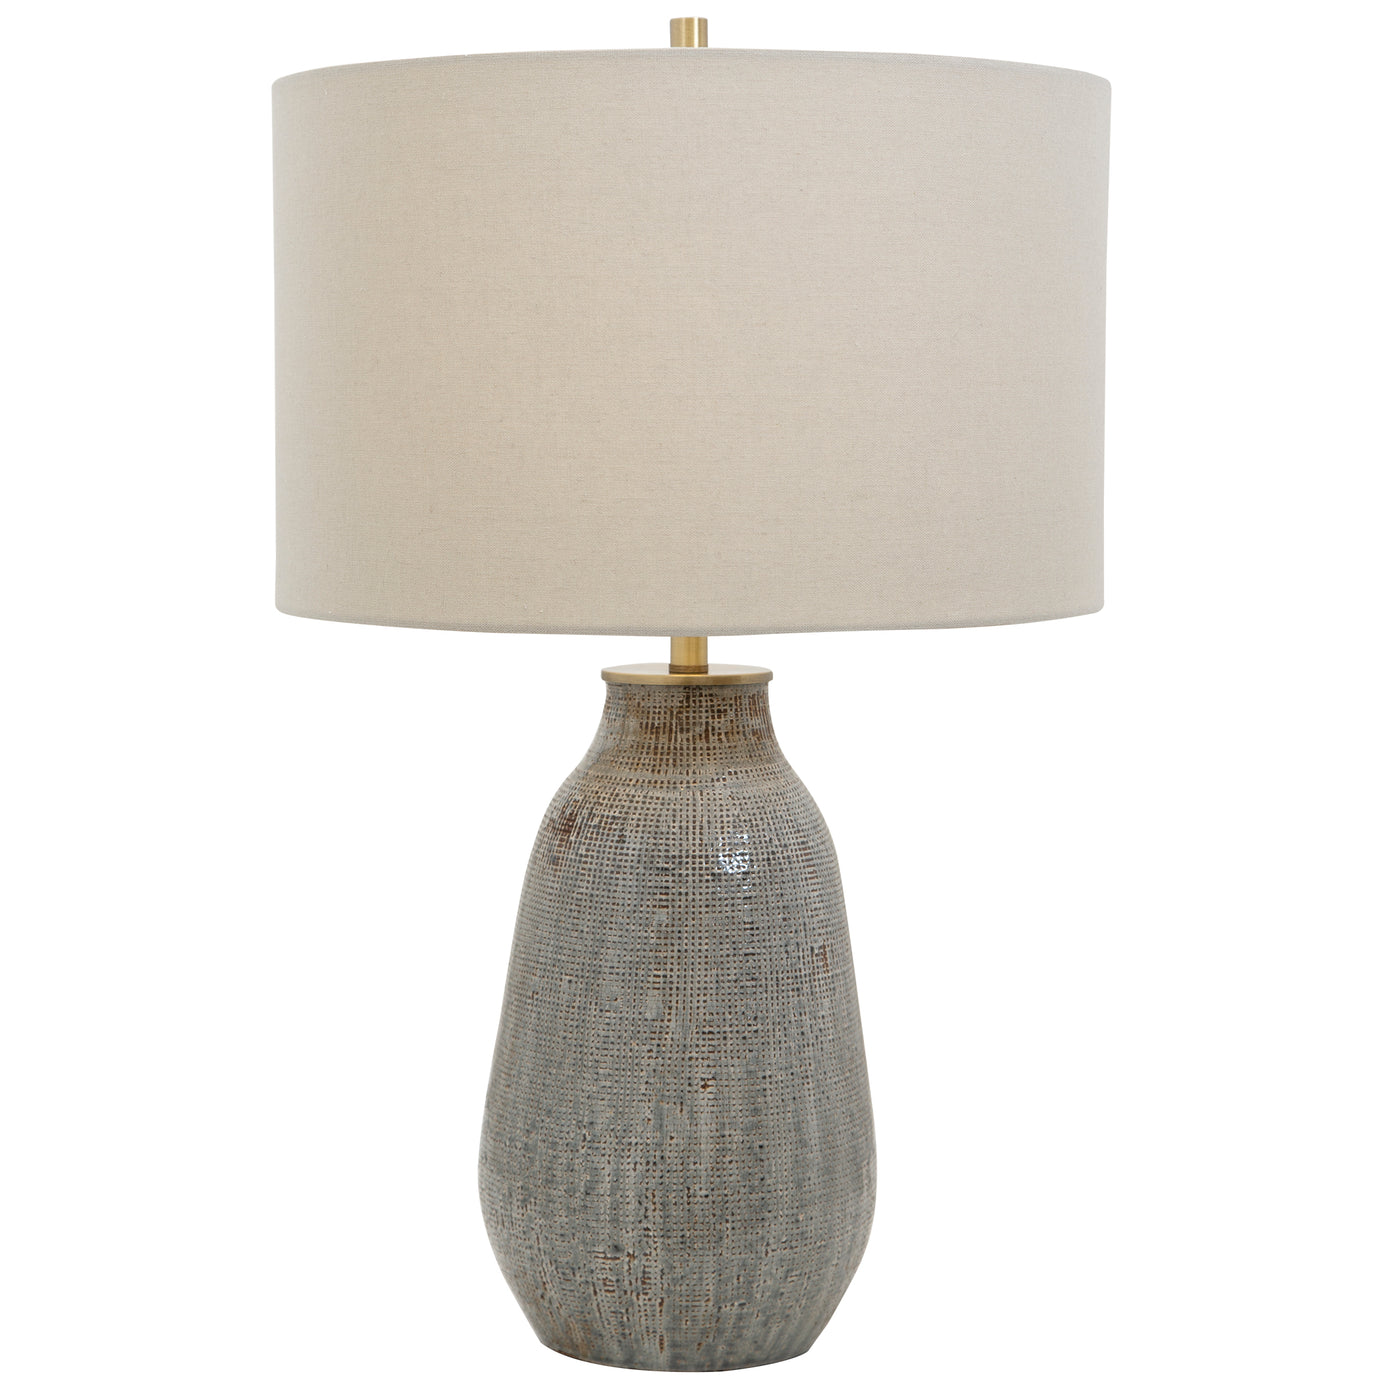 Exhibiting A Handcrafted Look, This Ceramic Table Lamp Features A Textured Finish Reminiscent Of Woven Fabric And Is Finis...